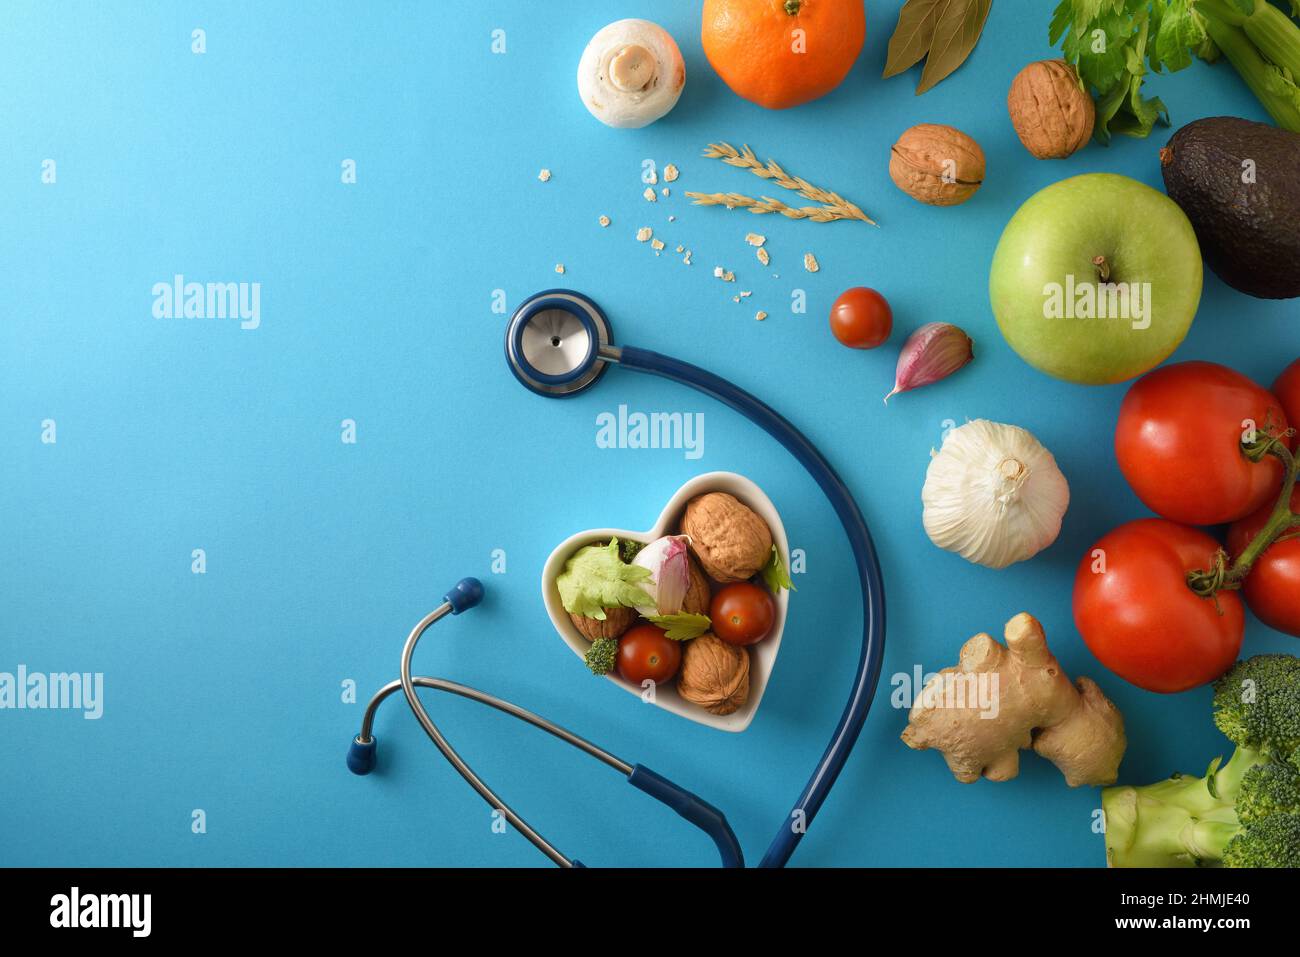 Natural dietary medicine with healthy food and stethoscope on blue background. Top view. Horizontal composition. Stock Photo